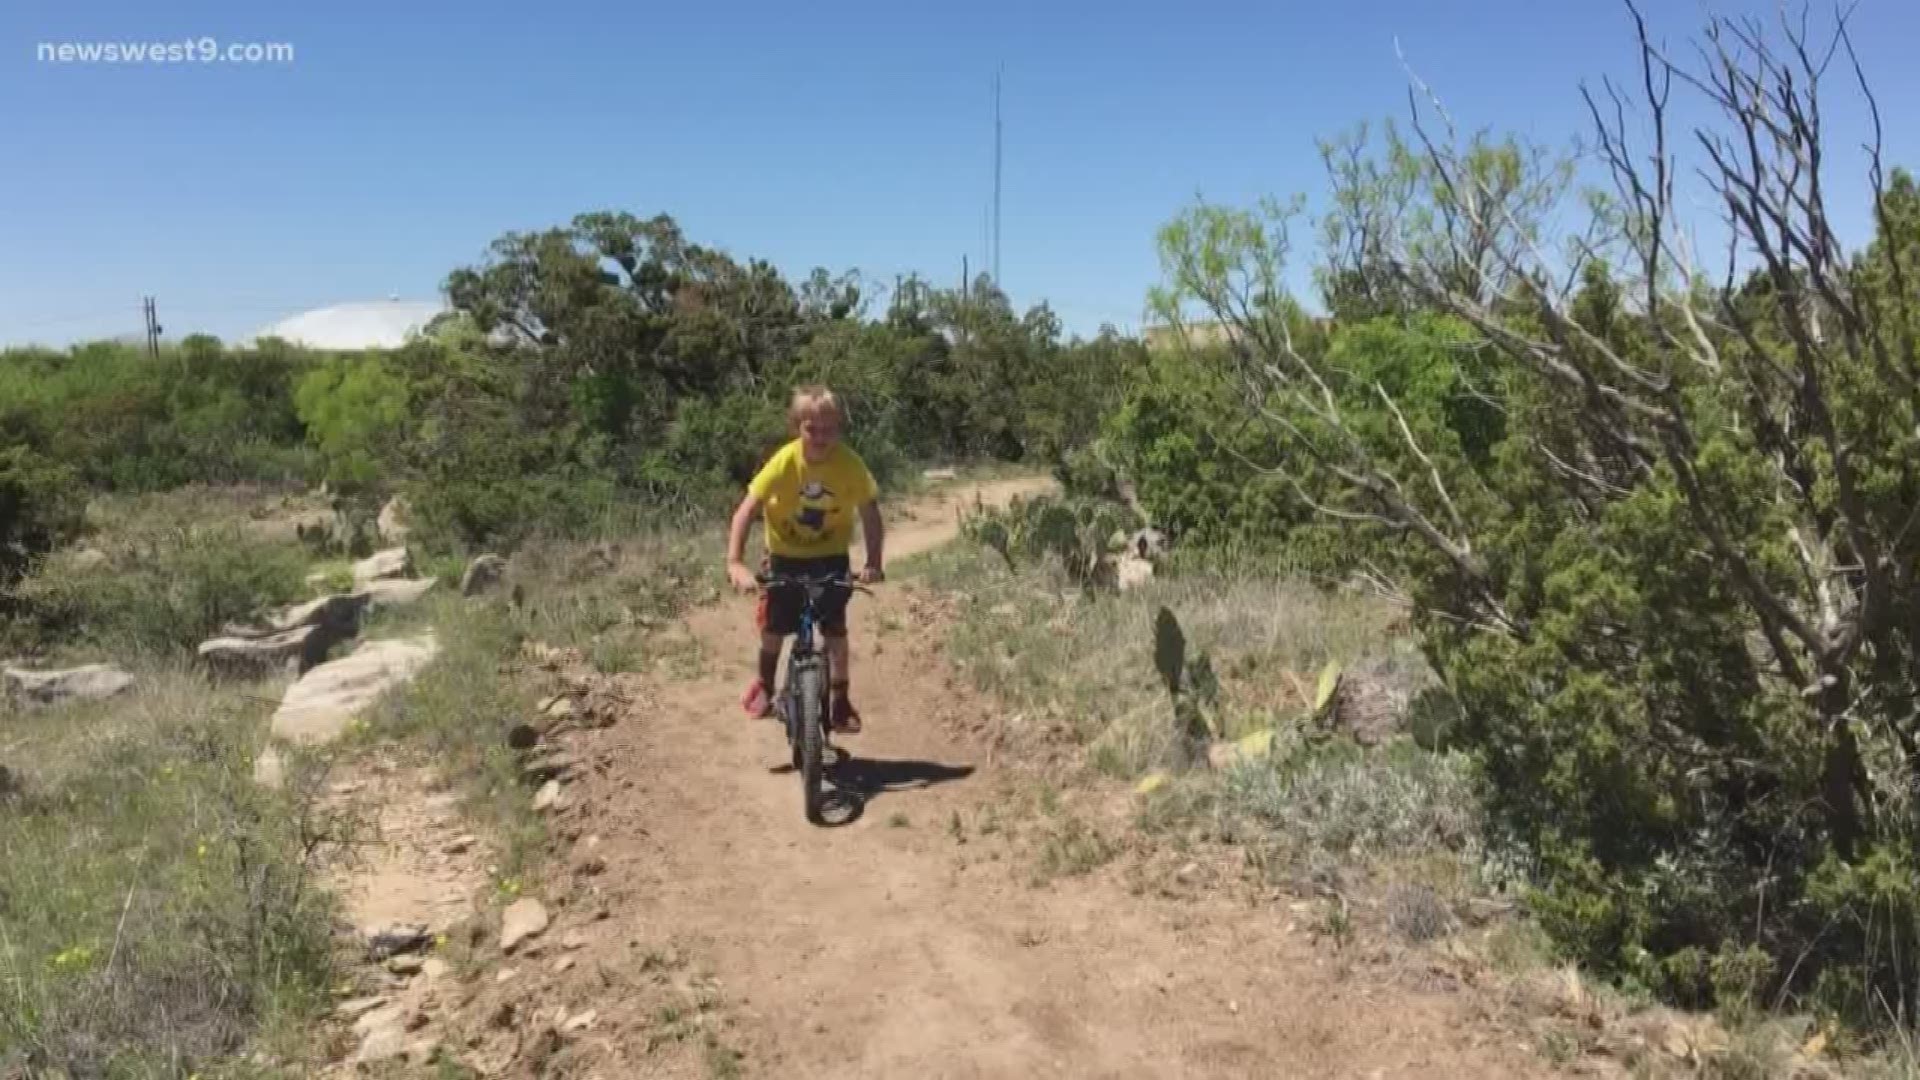 State Park opens first of many new trails